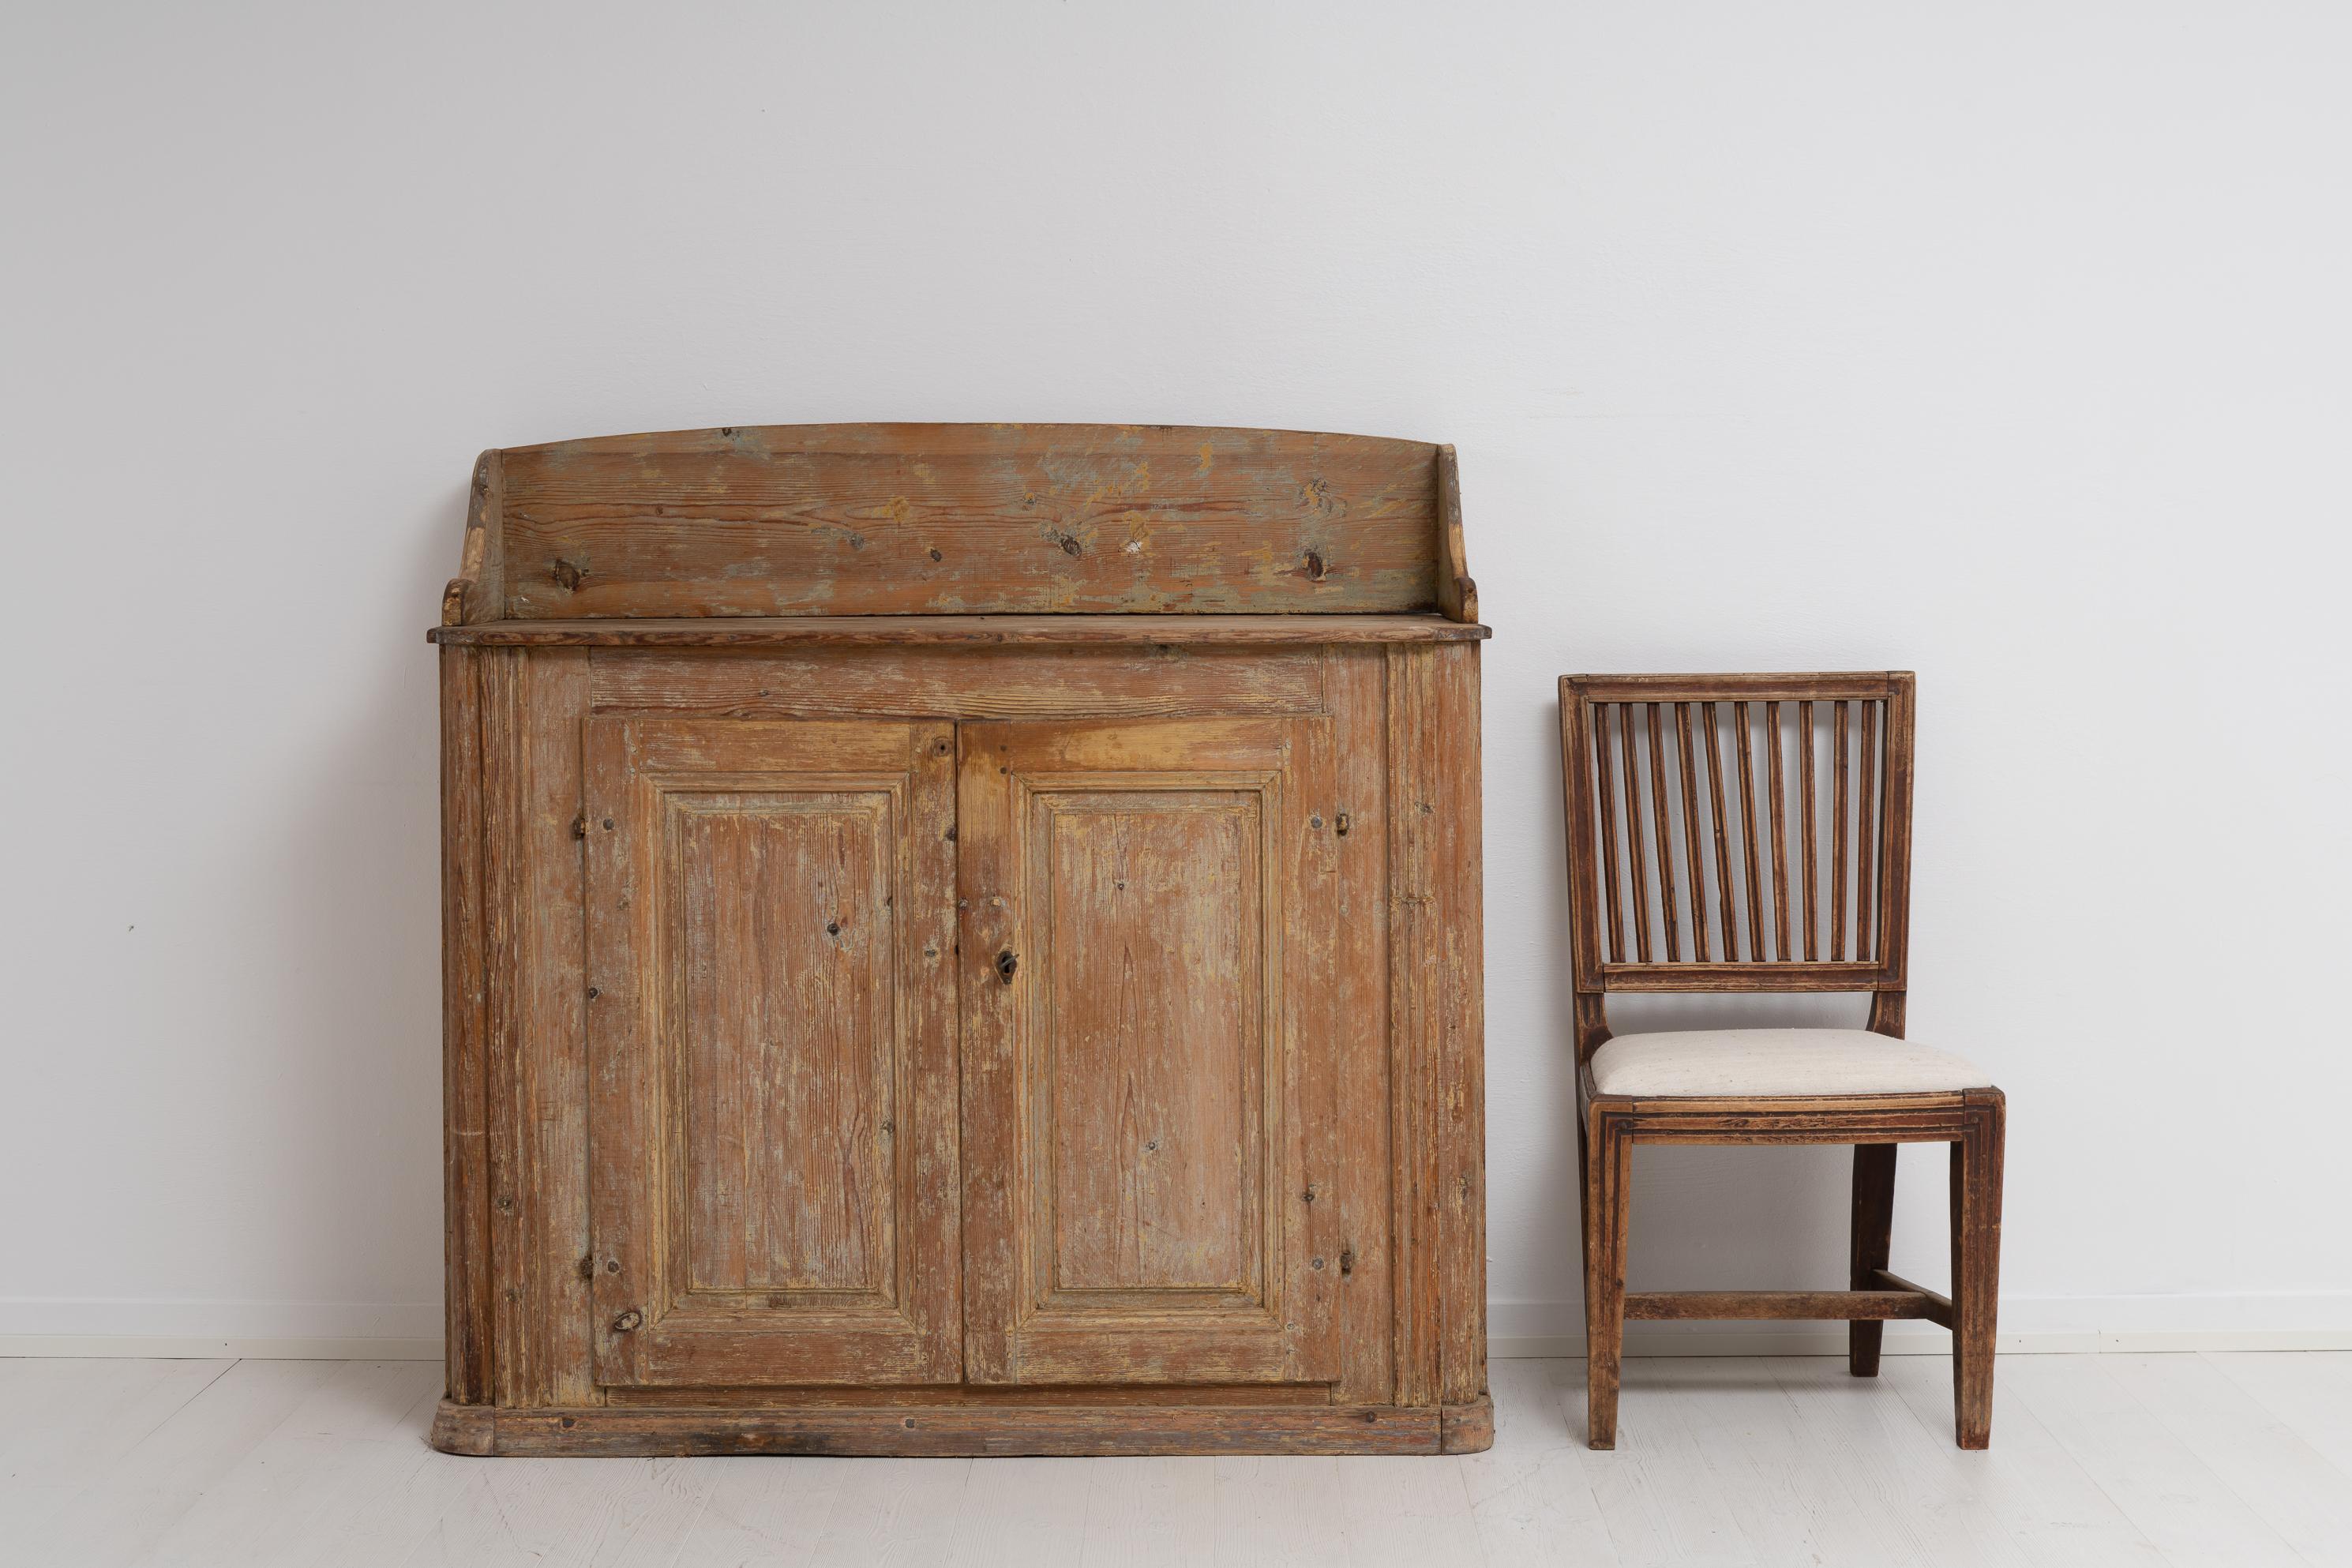 Northern Swedish late 18th century country house rococo sideboard. The sideboard is pine with traces of the original paint. Worn and distressed surface with characterful patina after 250 years of use. Healthy and solid frame. Minor marks and traces